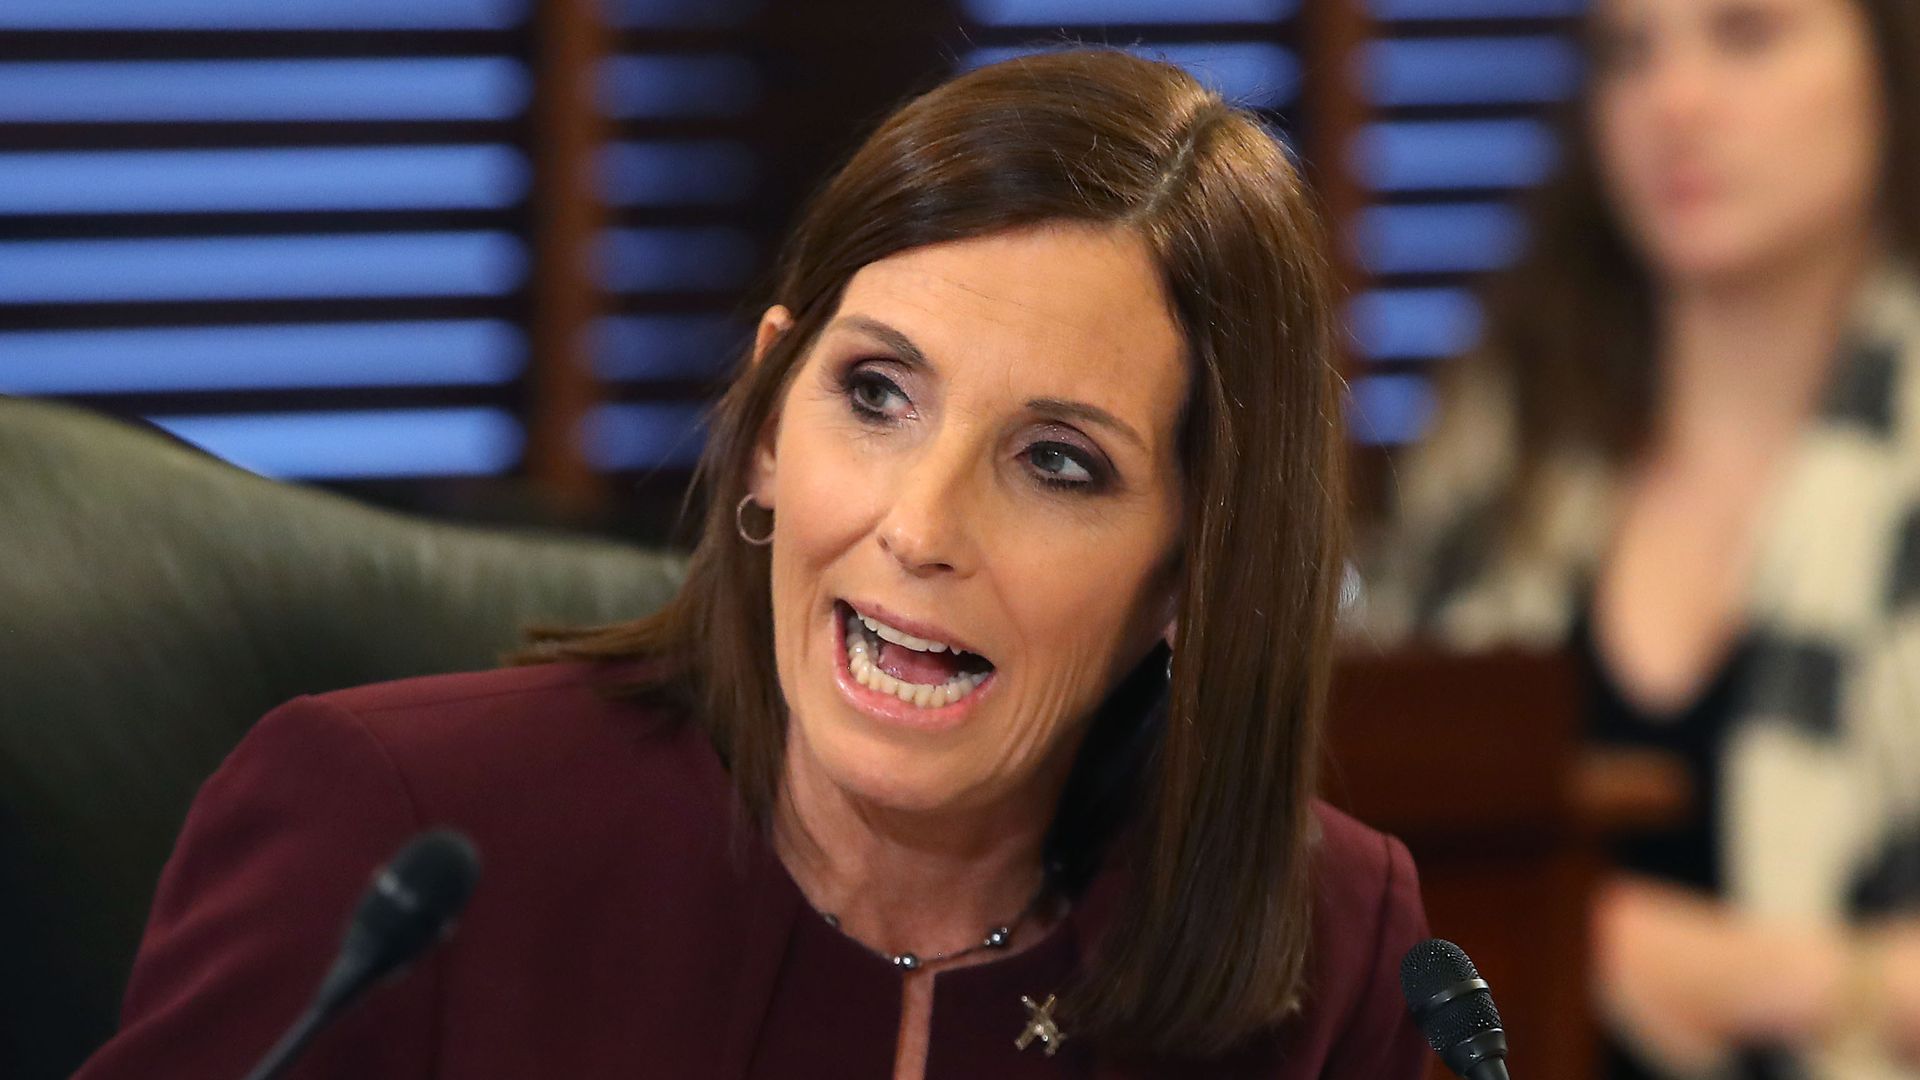 Sen. Martha McSally says she hopes abuse survivors can find some healing in their own lives.